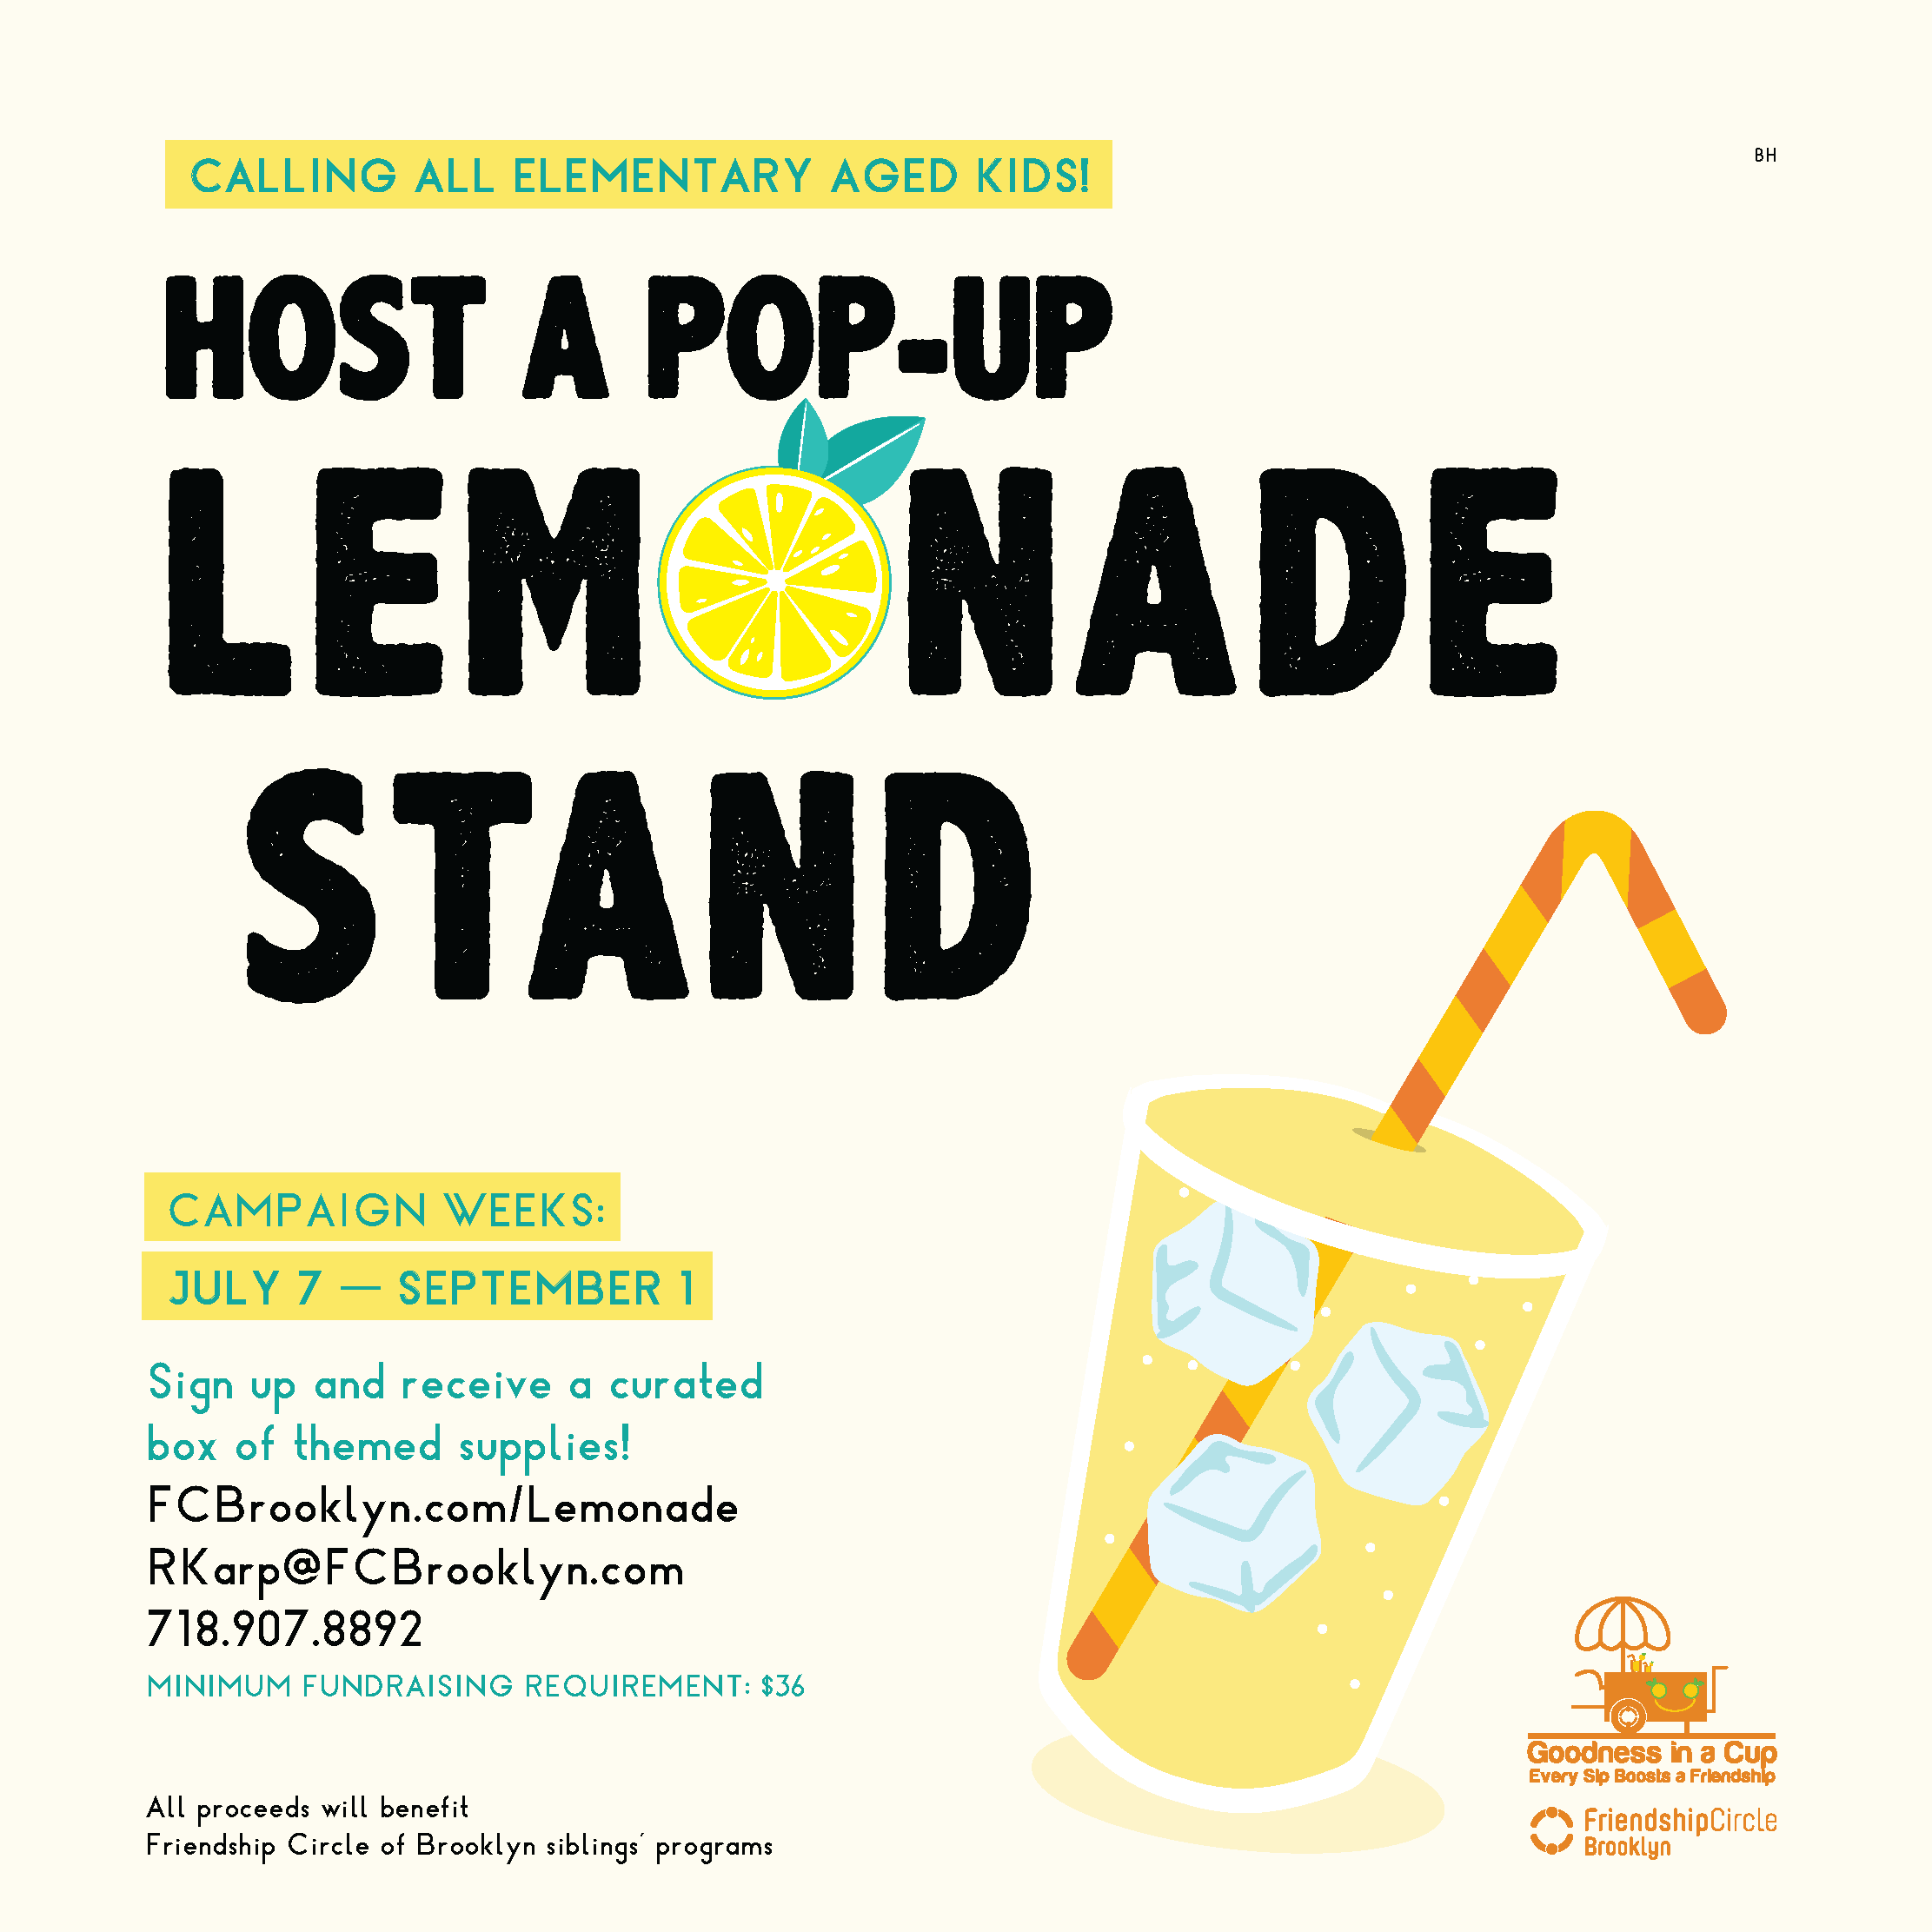 Goodness in a Cup – Host a Pop-up Lemonade Stand!